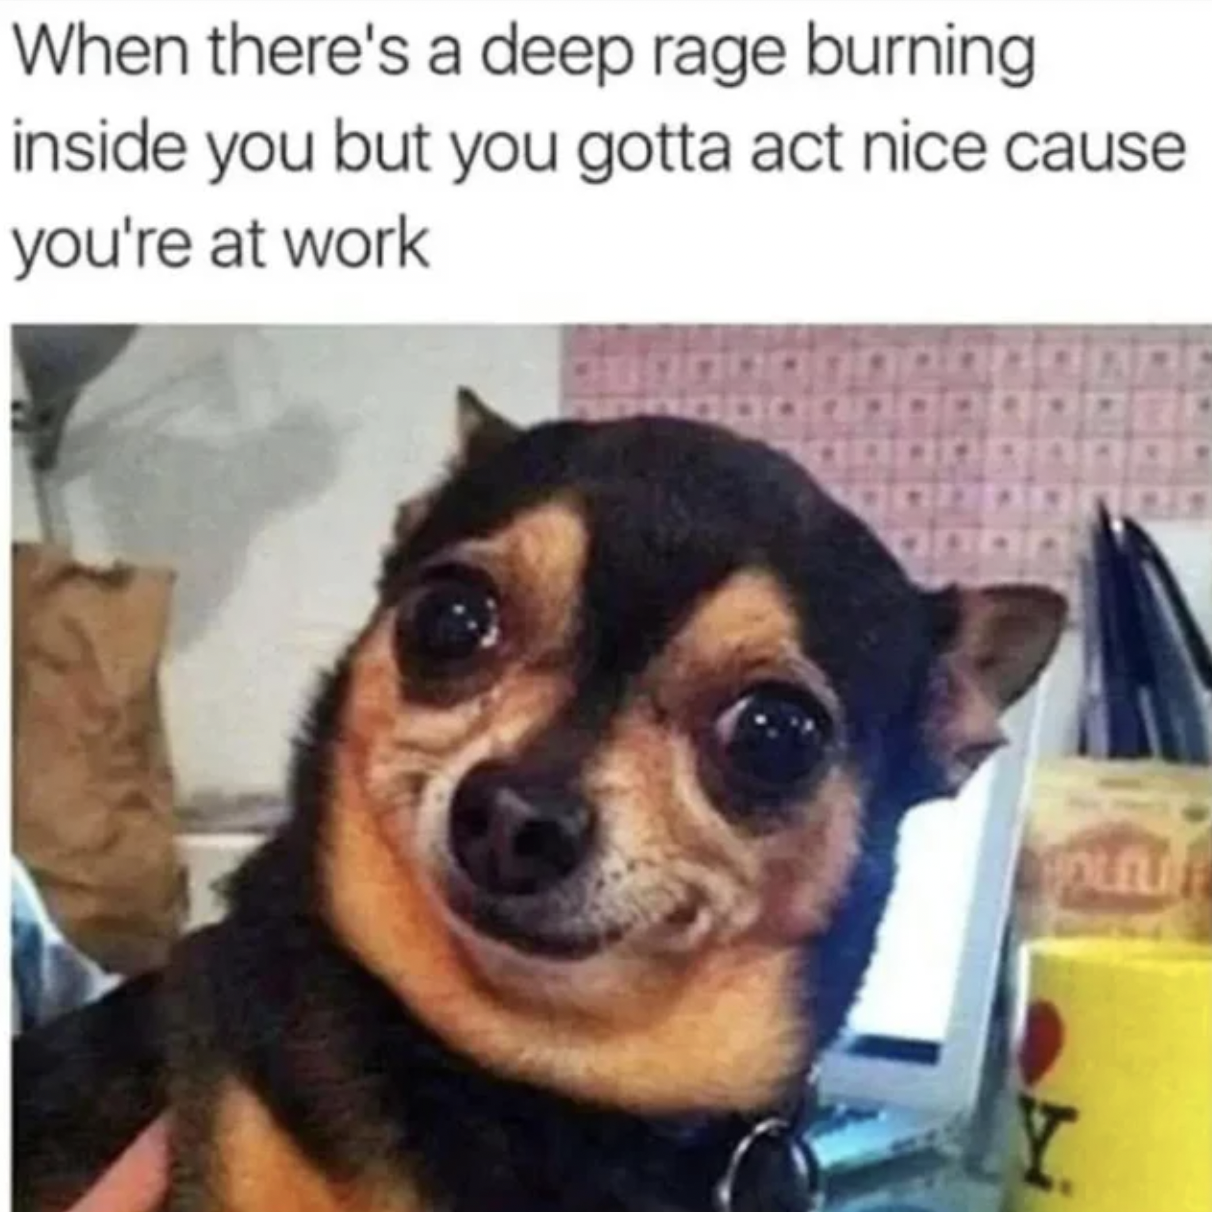 Work memes - there's a deep rage burning inside you but you gotta act nice cause you re at work - When there's a deep rage burning inside you but you gotta act nice cause you're at work